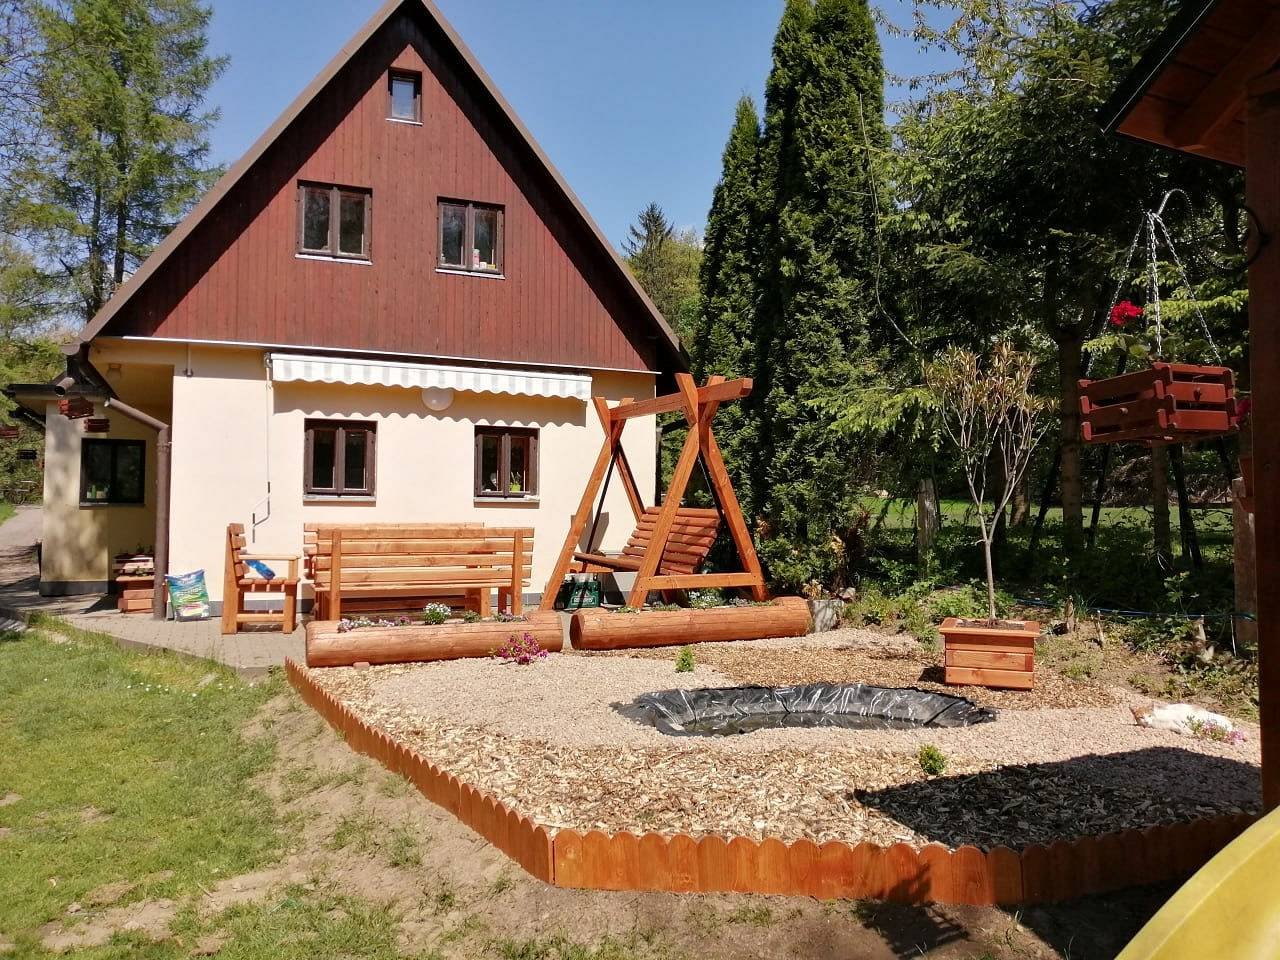 Vryprachtice cottage